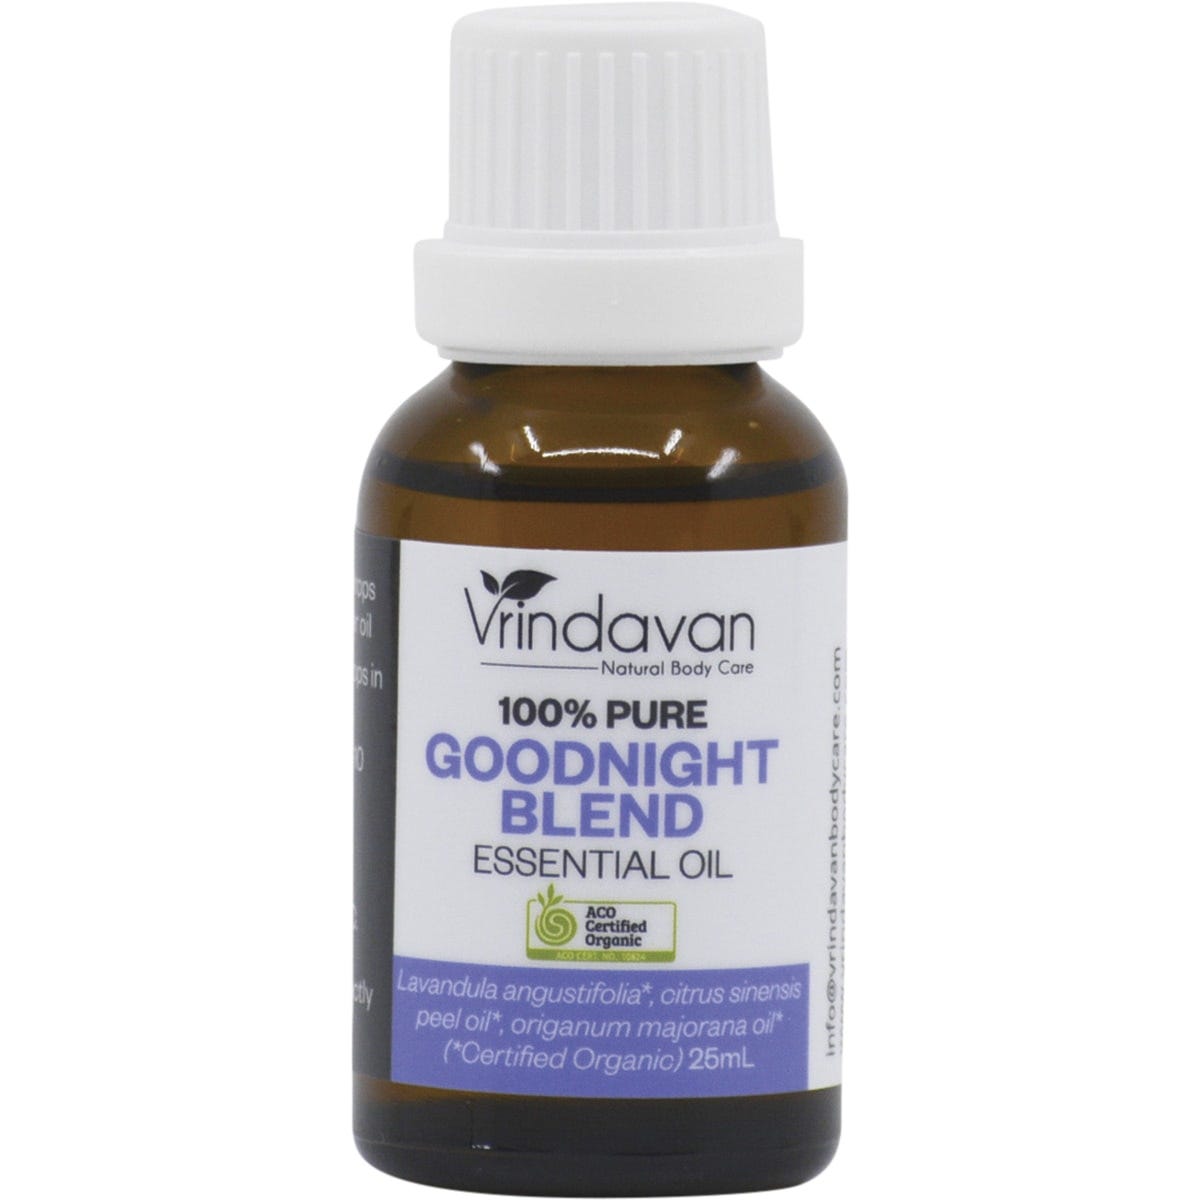 Vrindavan Essential Oil 100% Goodnight Blend 25ml - Dr Earth - Aromatherapy